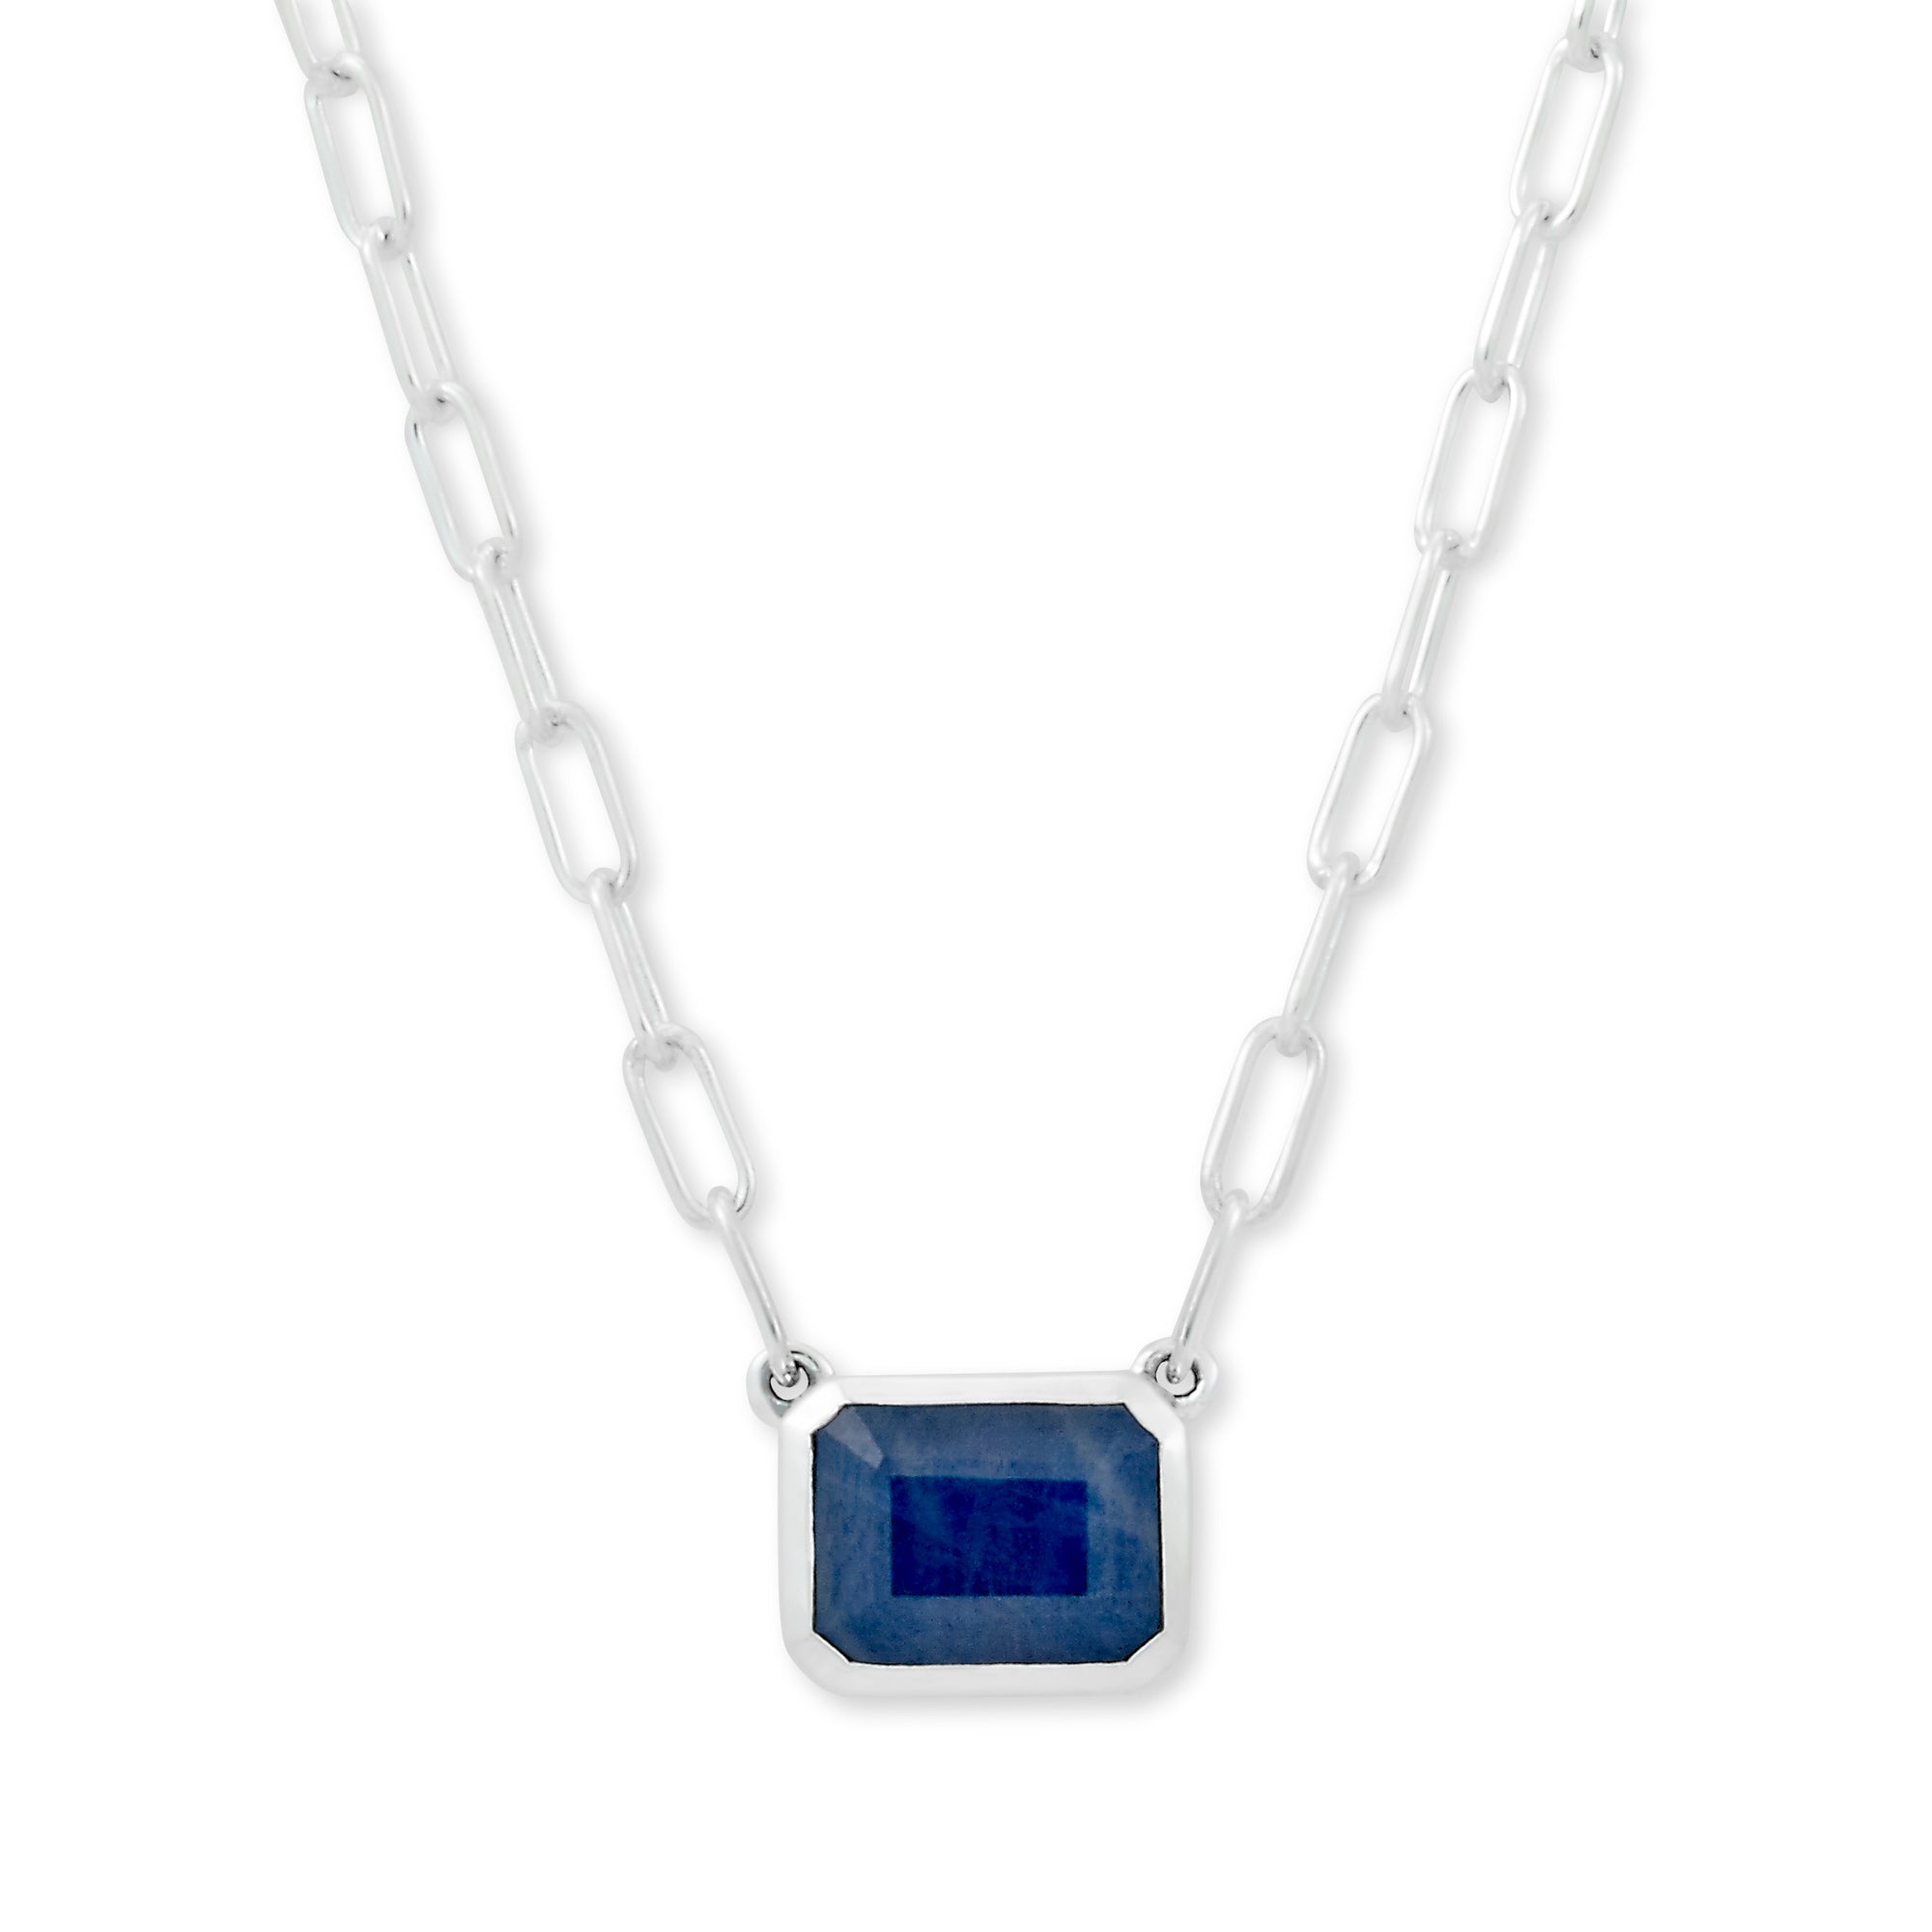 Blue Sapphire Eirini Necklace available at Talisman Collection Fine Jewelers in El Dorado Hills, CA and online. Specs: Blue Sapphire Eirini Necklace features an emerald-cut blue sapphire solitaire measuring 7x9mm, and is set in Sterling Silver. 